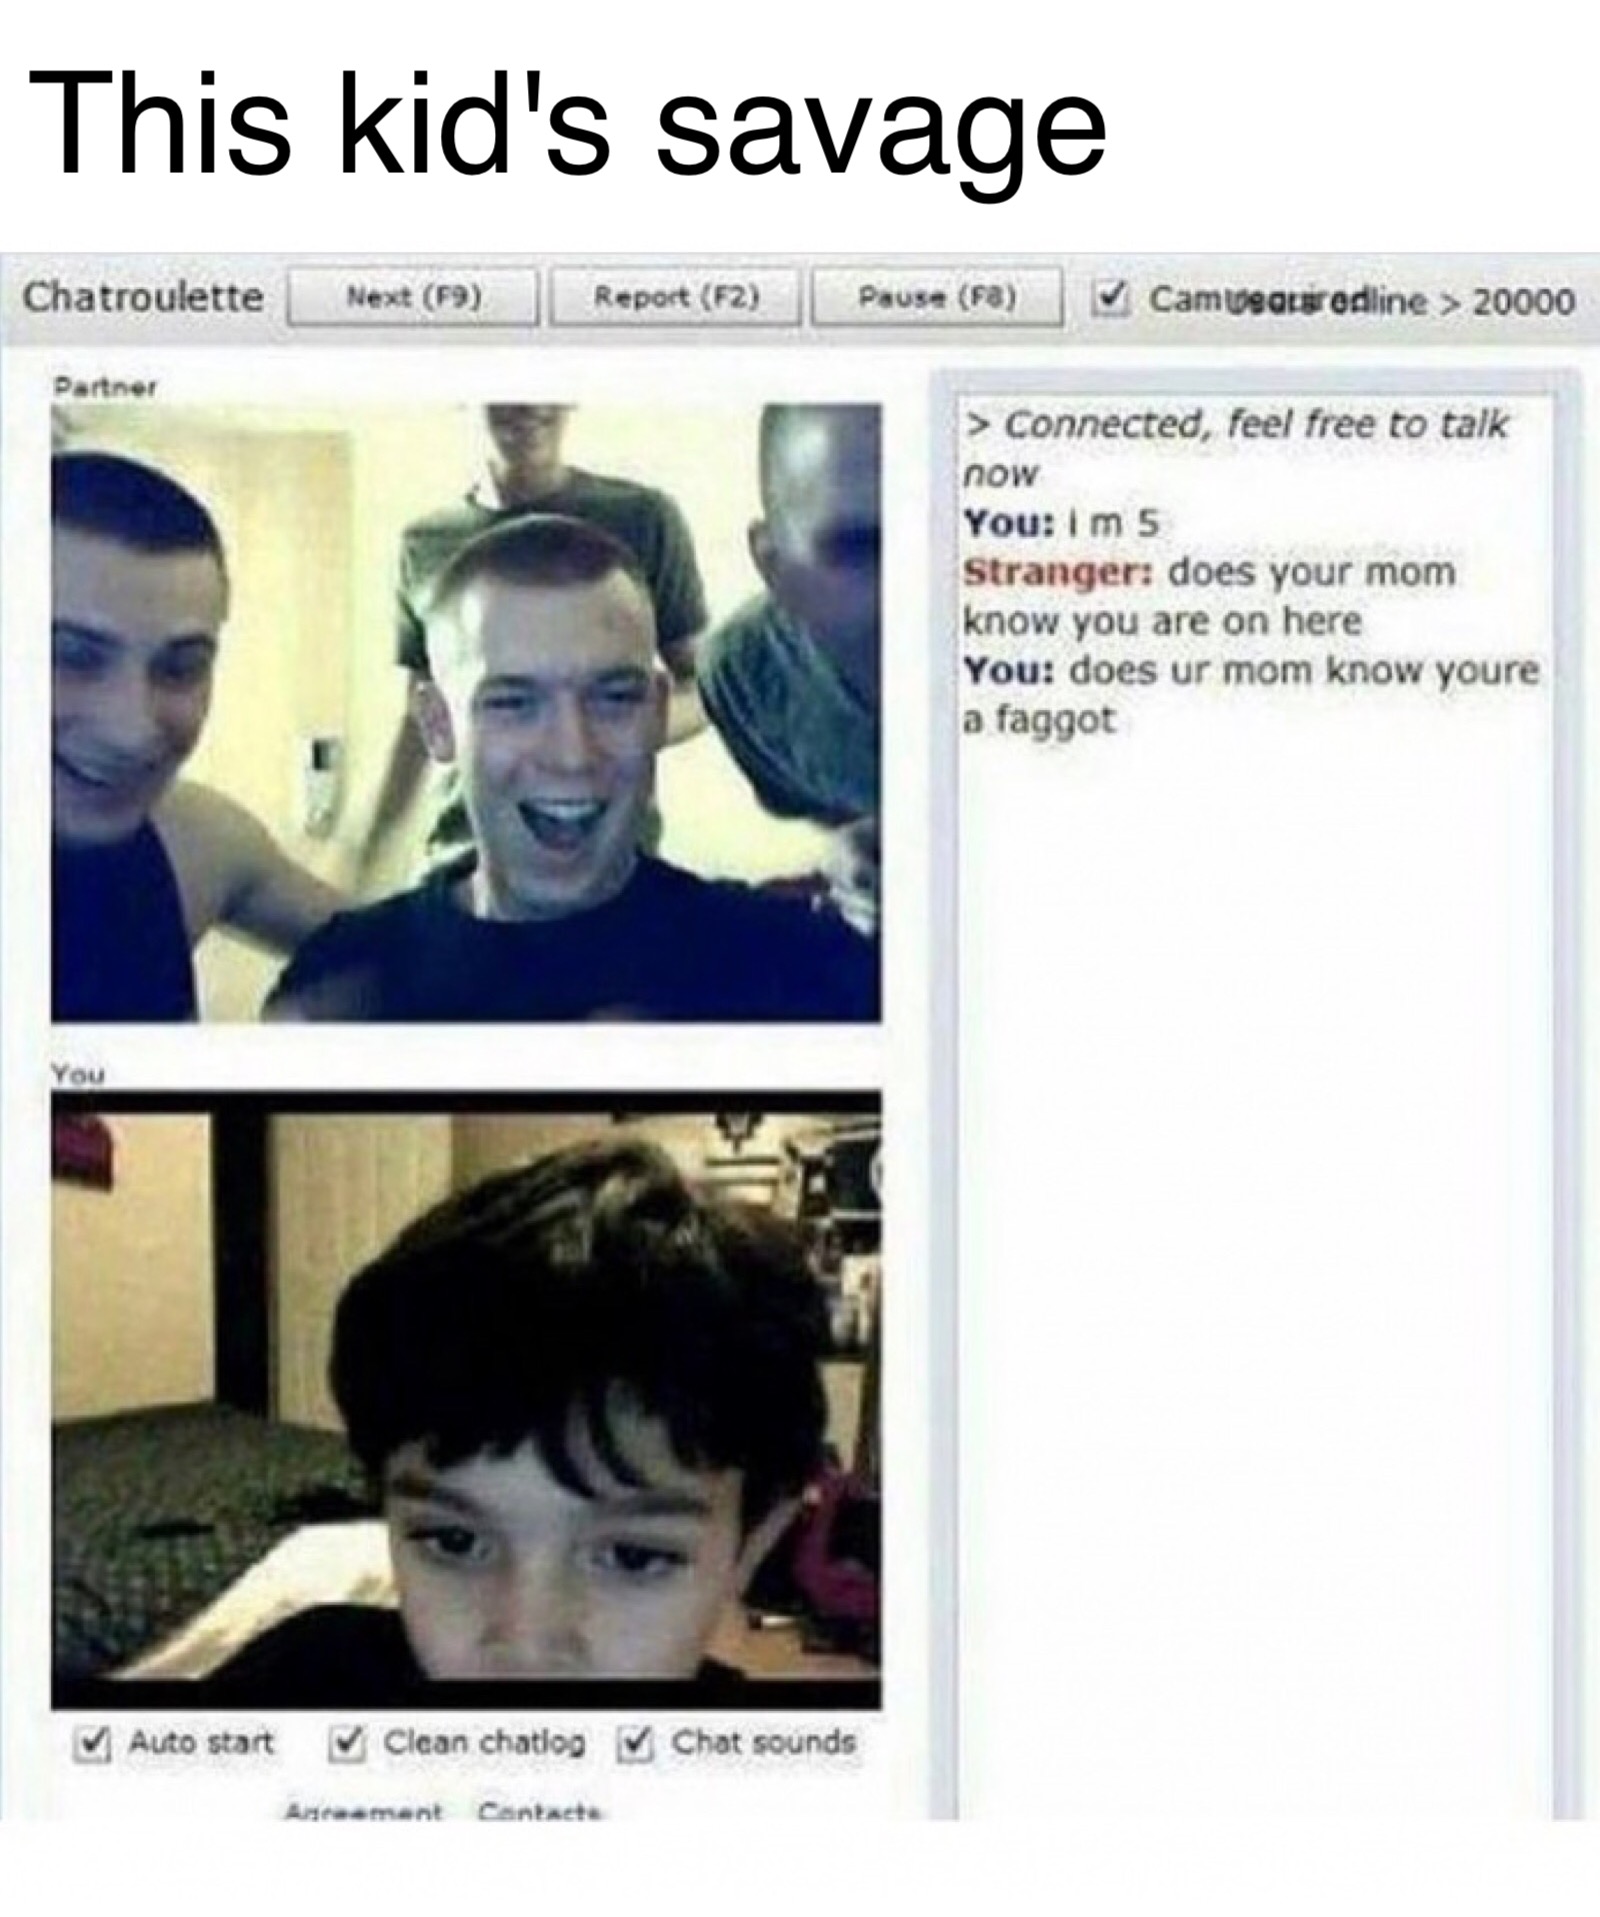 does your mom know you re on here - This kid's savage Chatroulette Next F9 Report F2 Pause Fb Tv Cam weariredline > 20000 Partner > Connected, feel free to talk now You im 5 Stranger does your mom know you are on here You does ur mom know youre a faggot Y